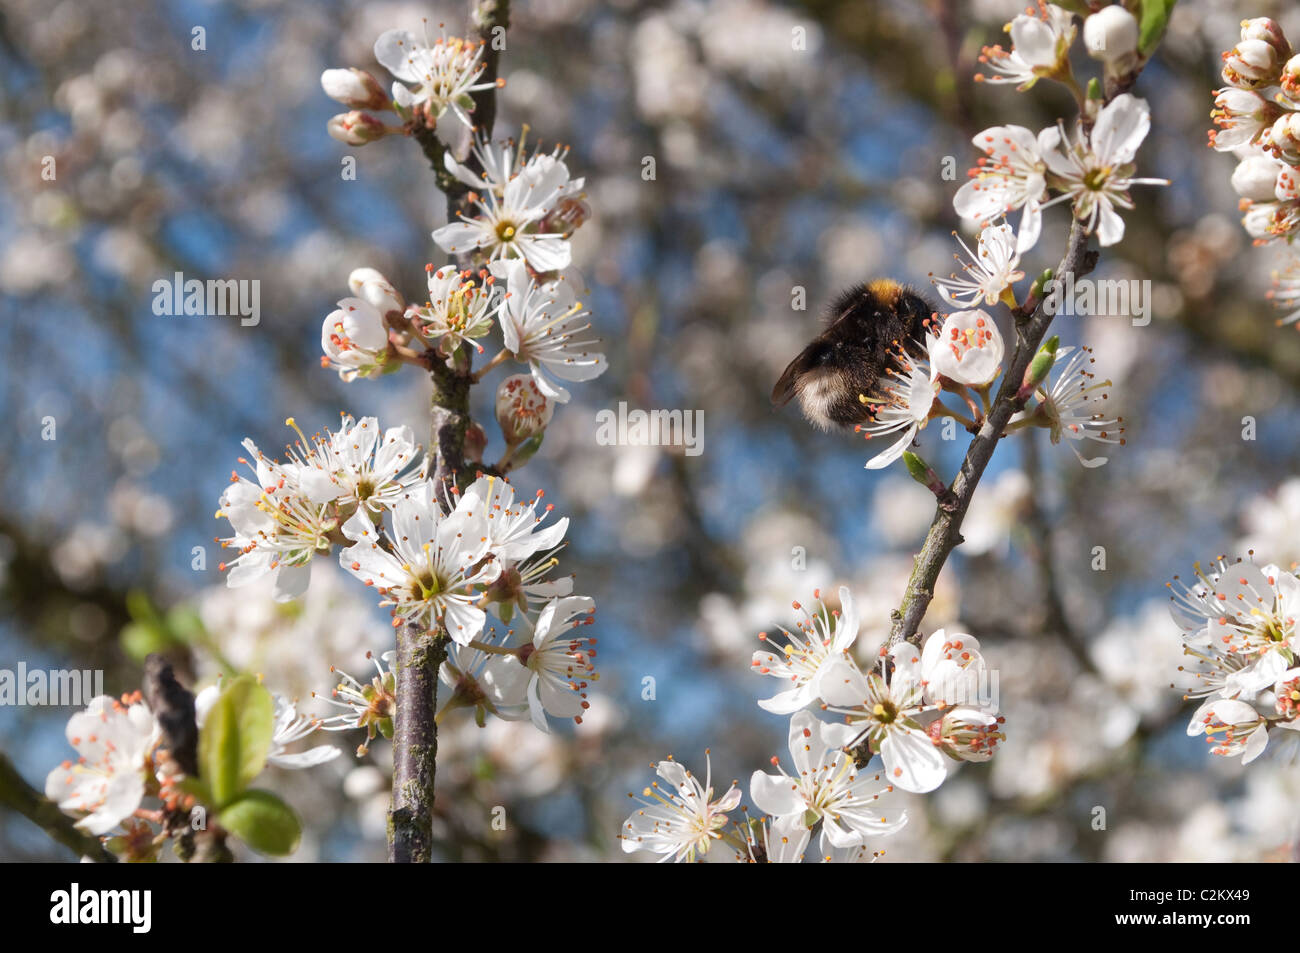 Bumble bee on blossom Stock Photo